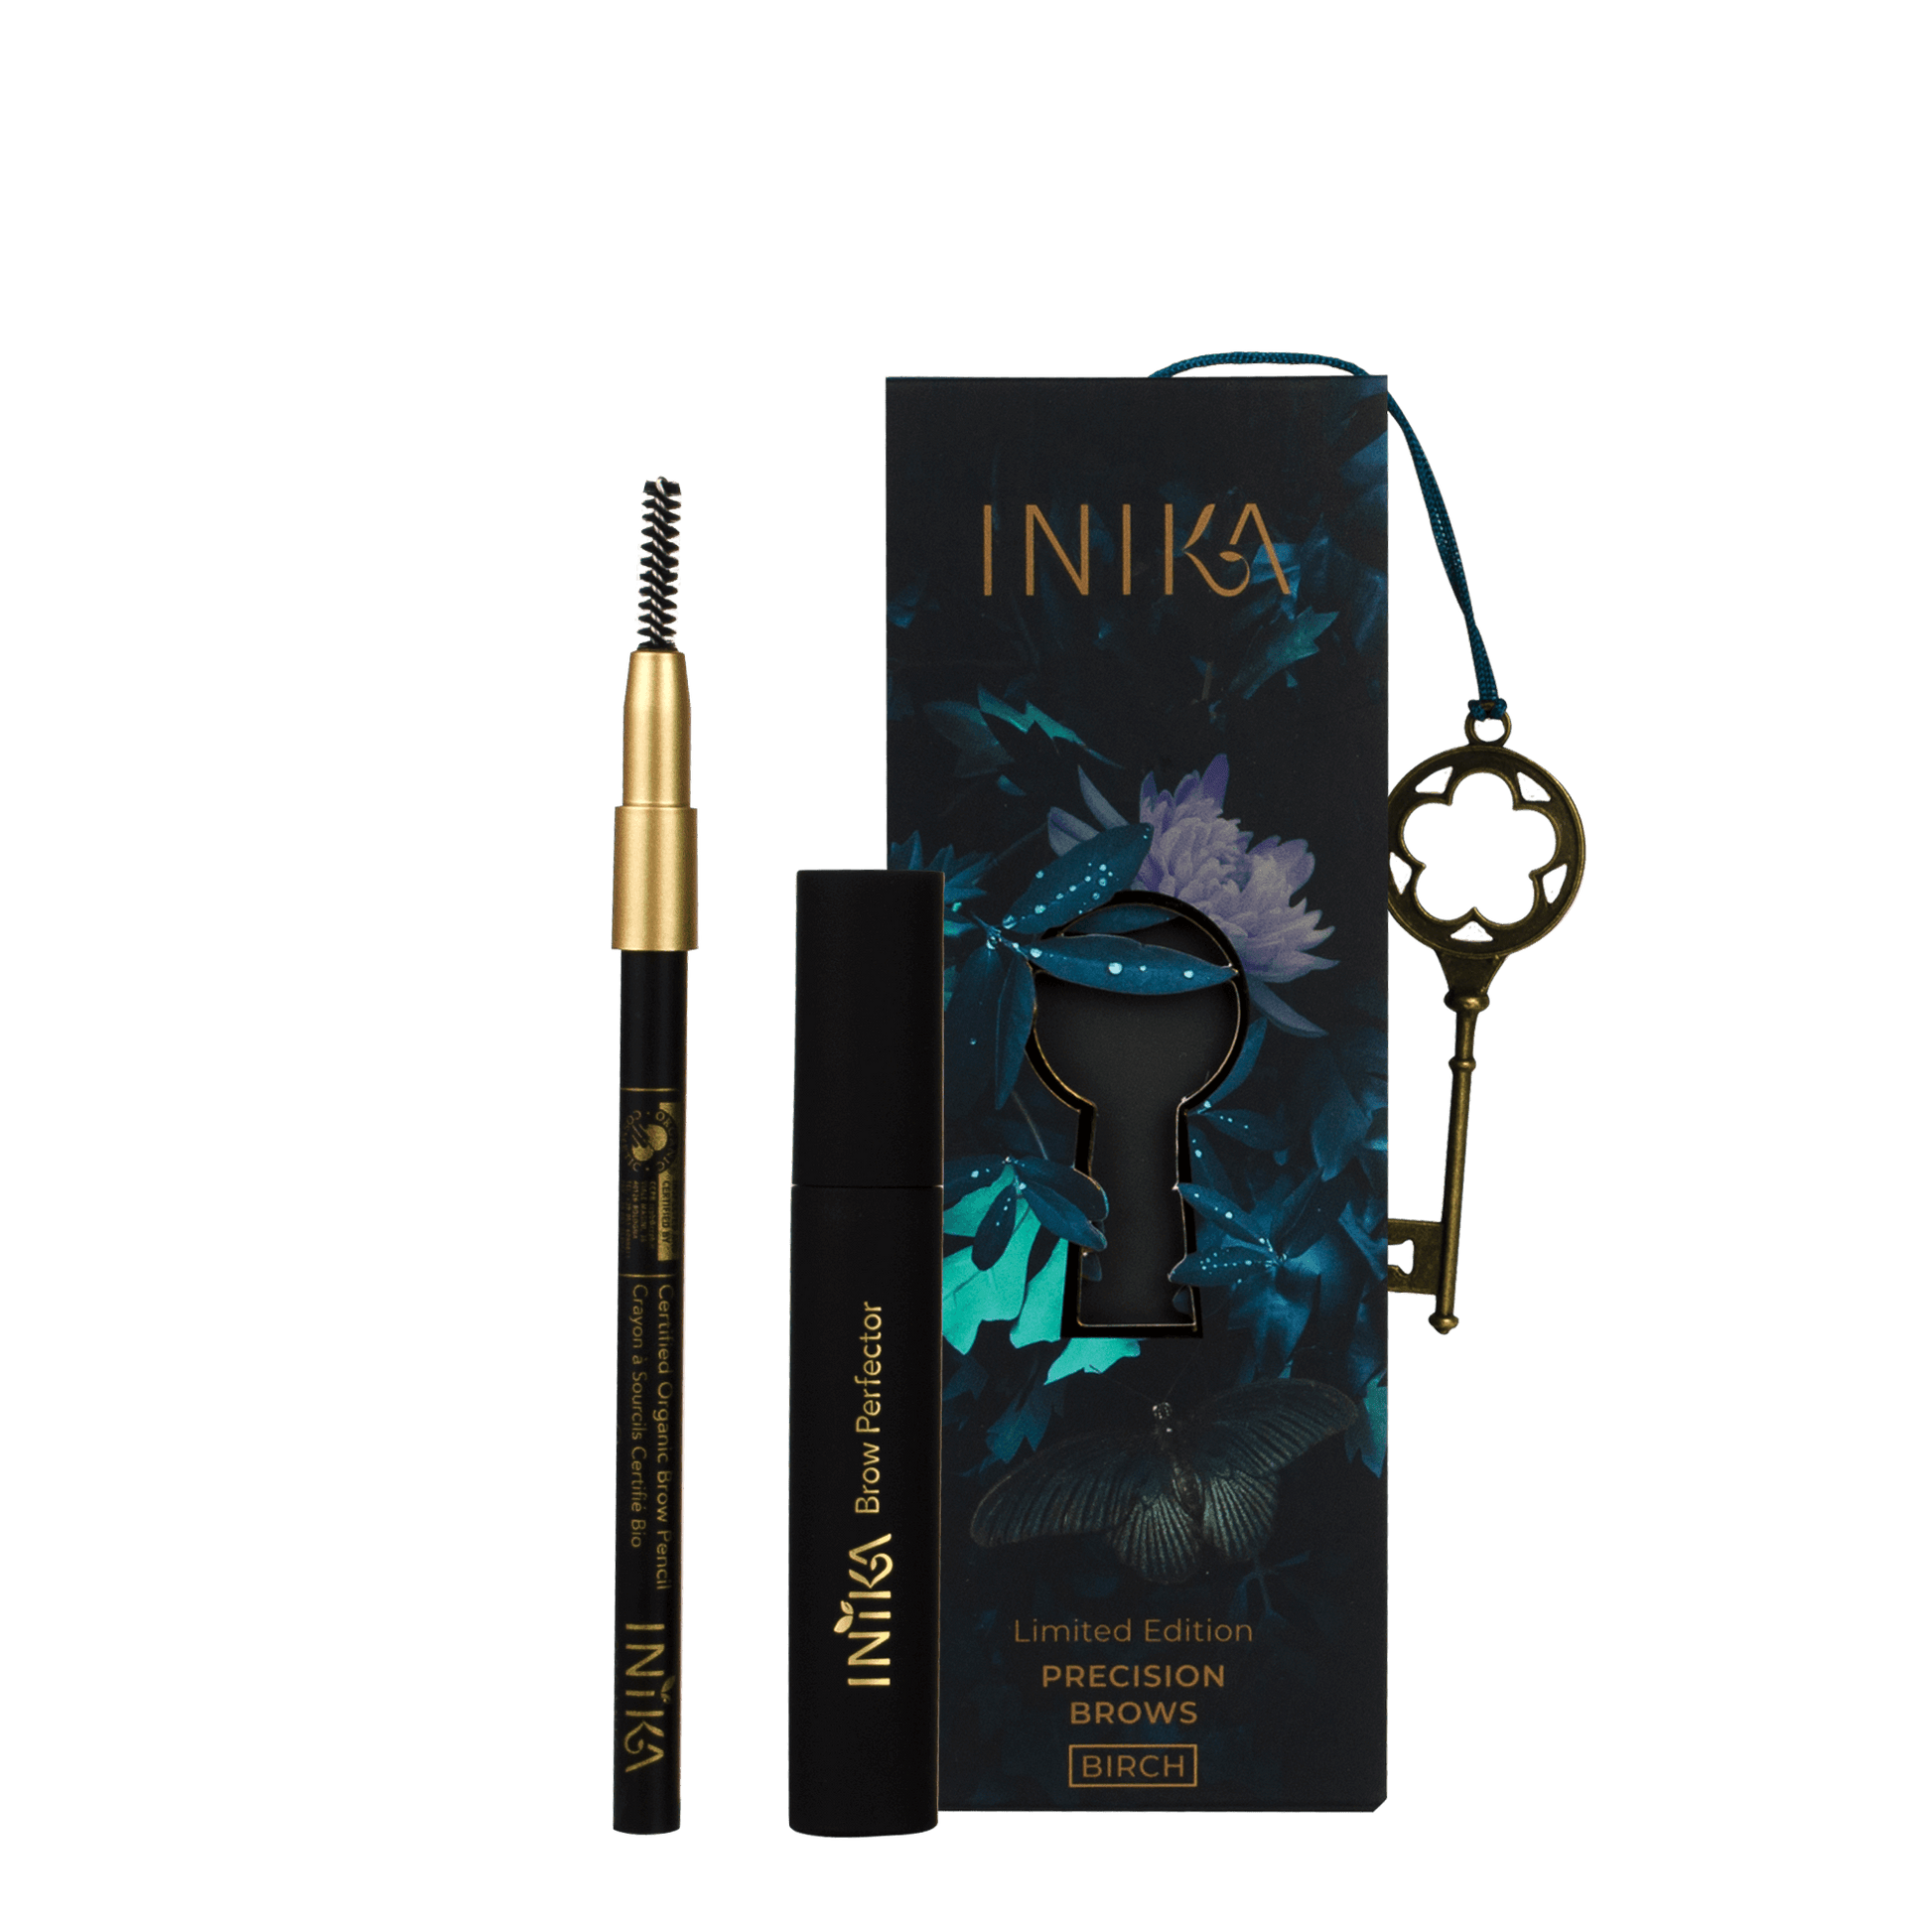 Limited Edition Precision Brows, Birch, Blonde - Beautiful Creatures Makeup & Beauty